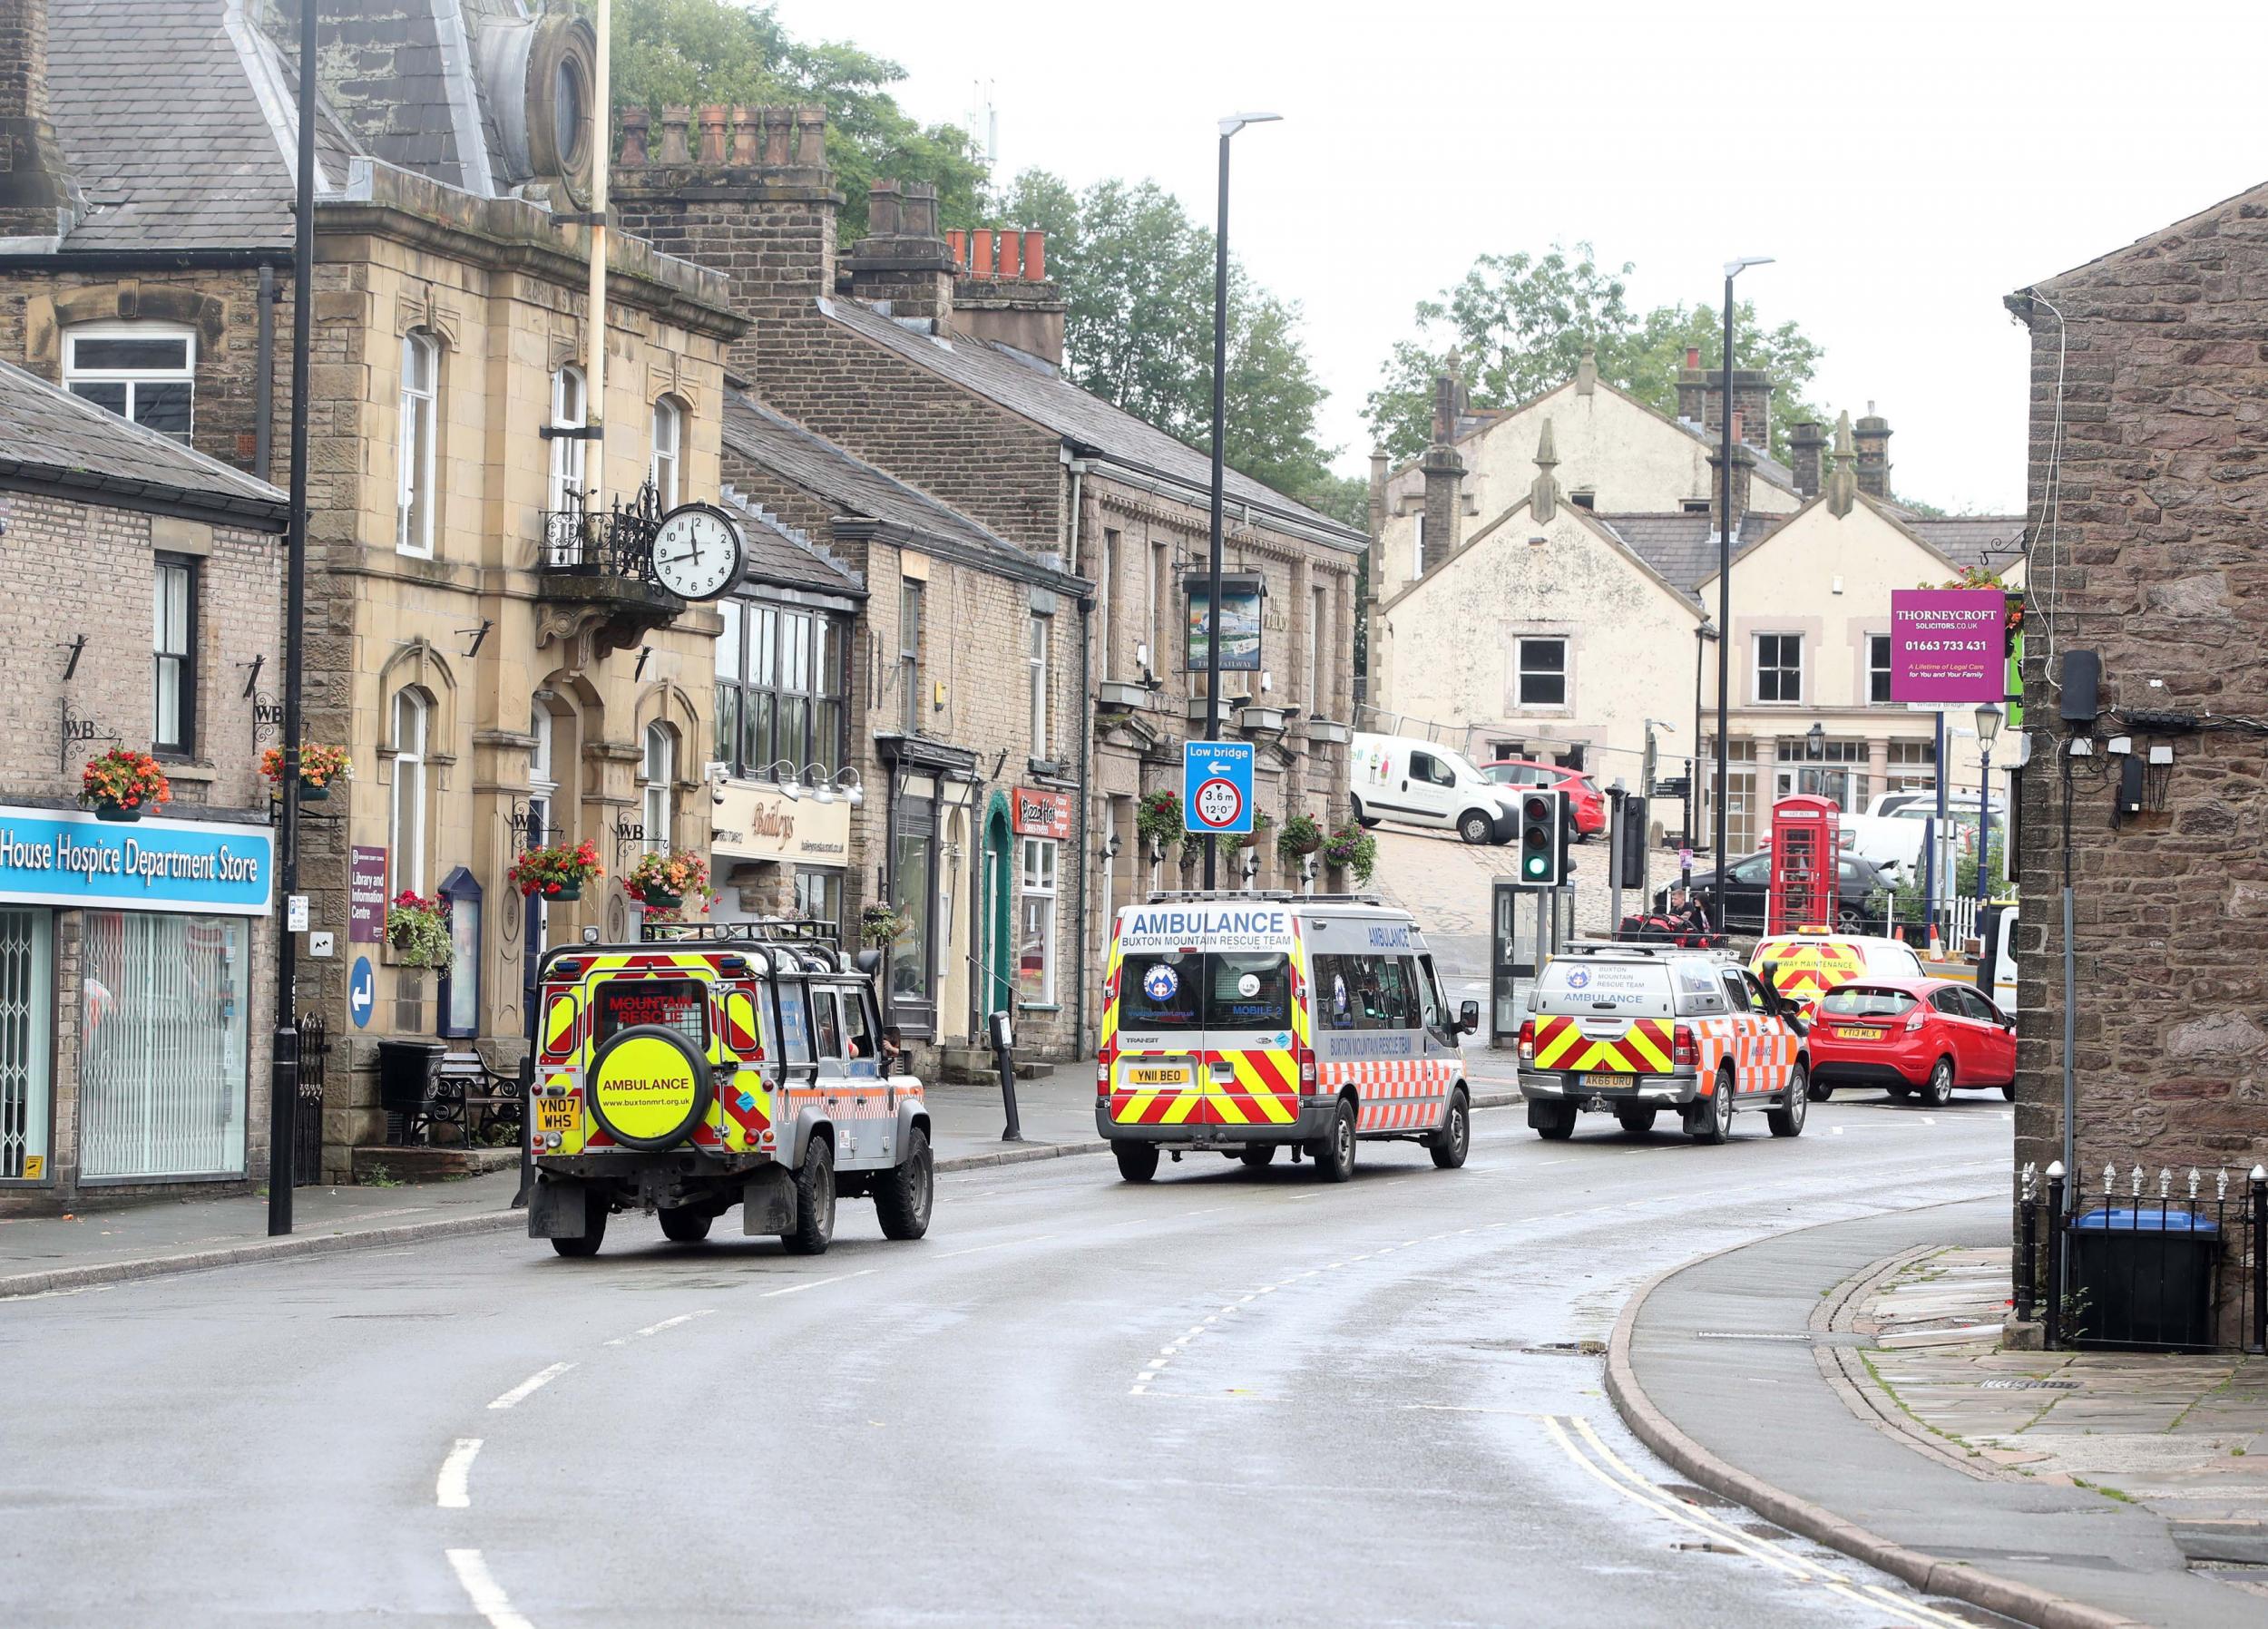 Emergency services in the village of Whaley Bridge after Toddbrook Reservoir was damaged in heavy rainfall